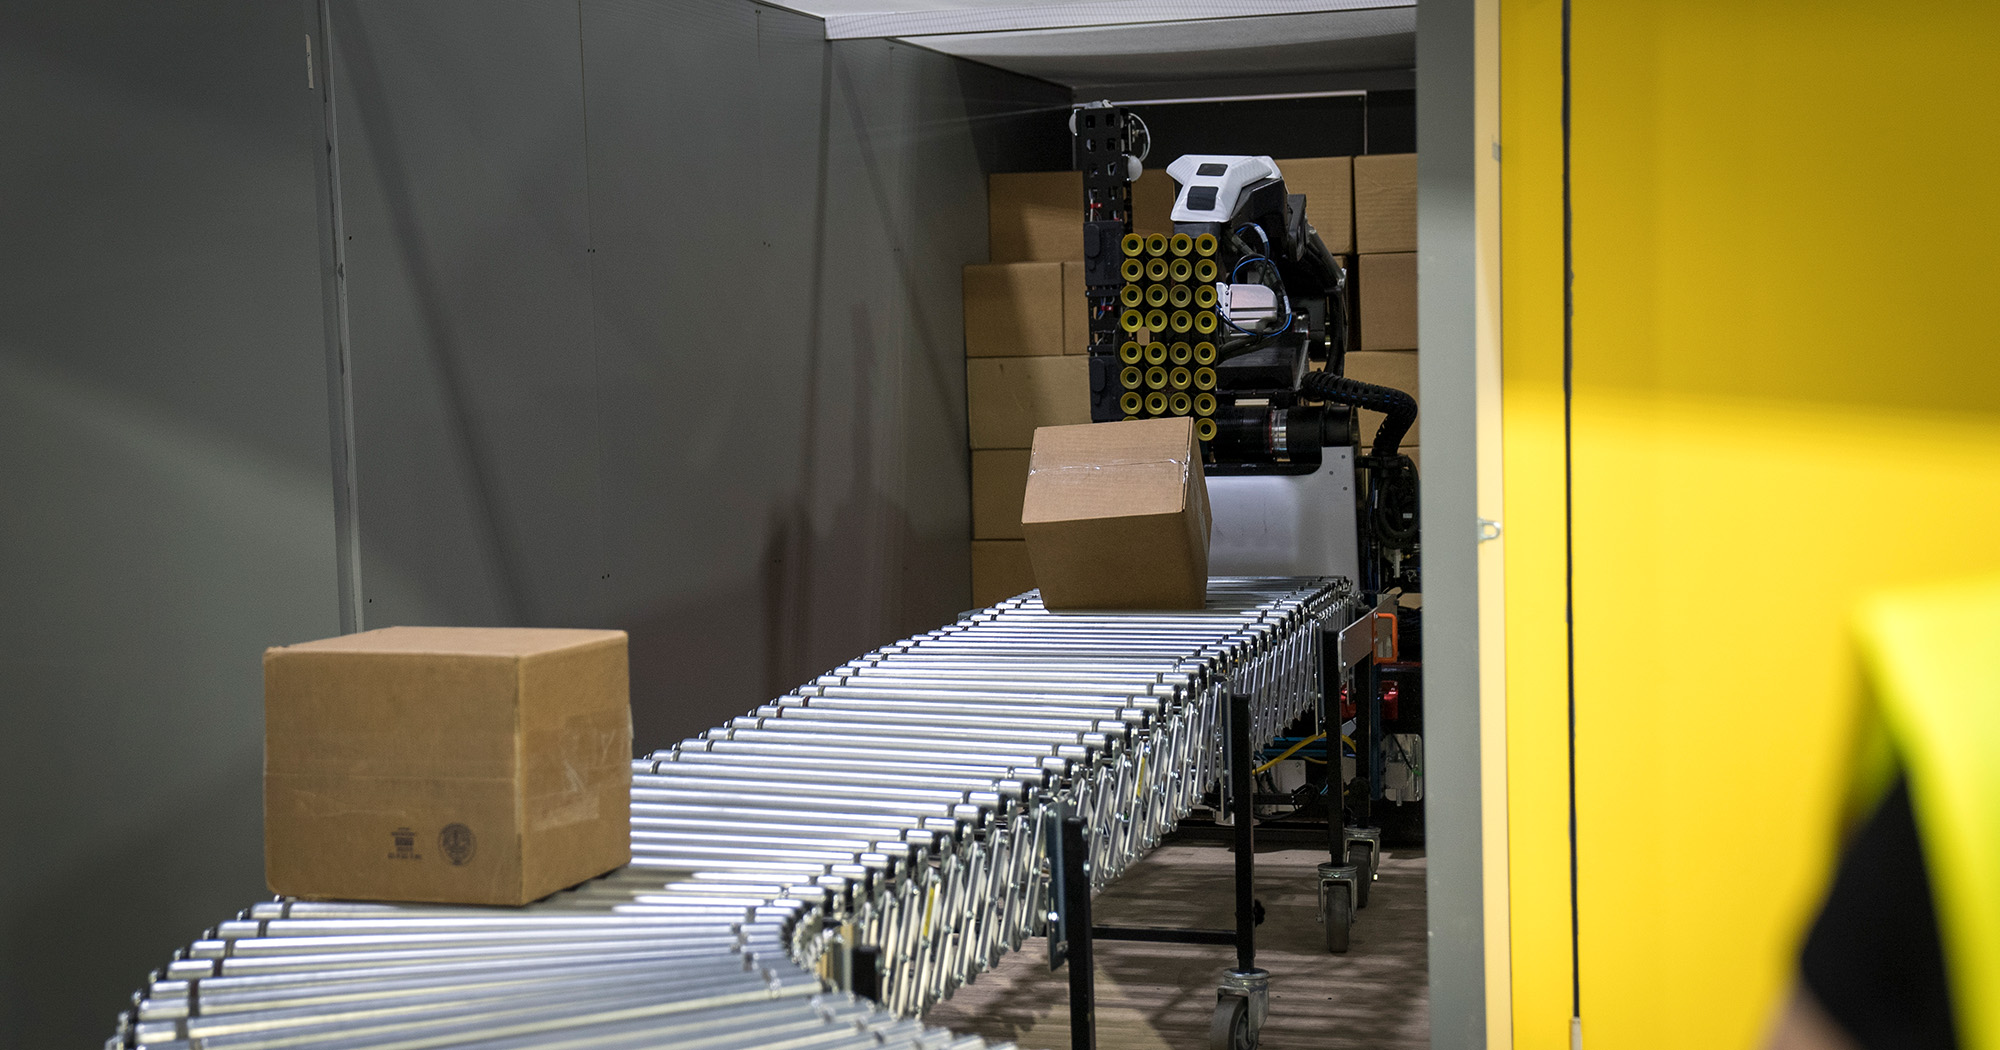 Stretch Proto unloads cases in the Boston Dynamics booth at MODEX 2022